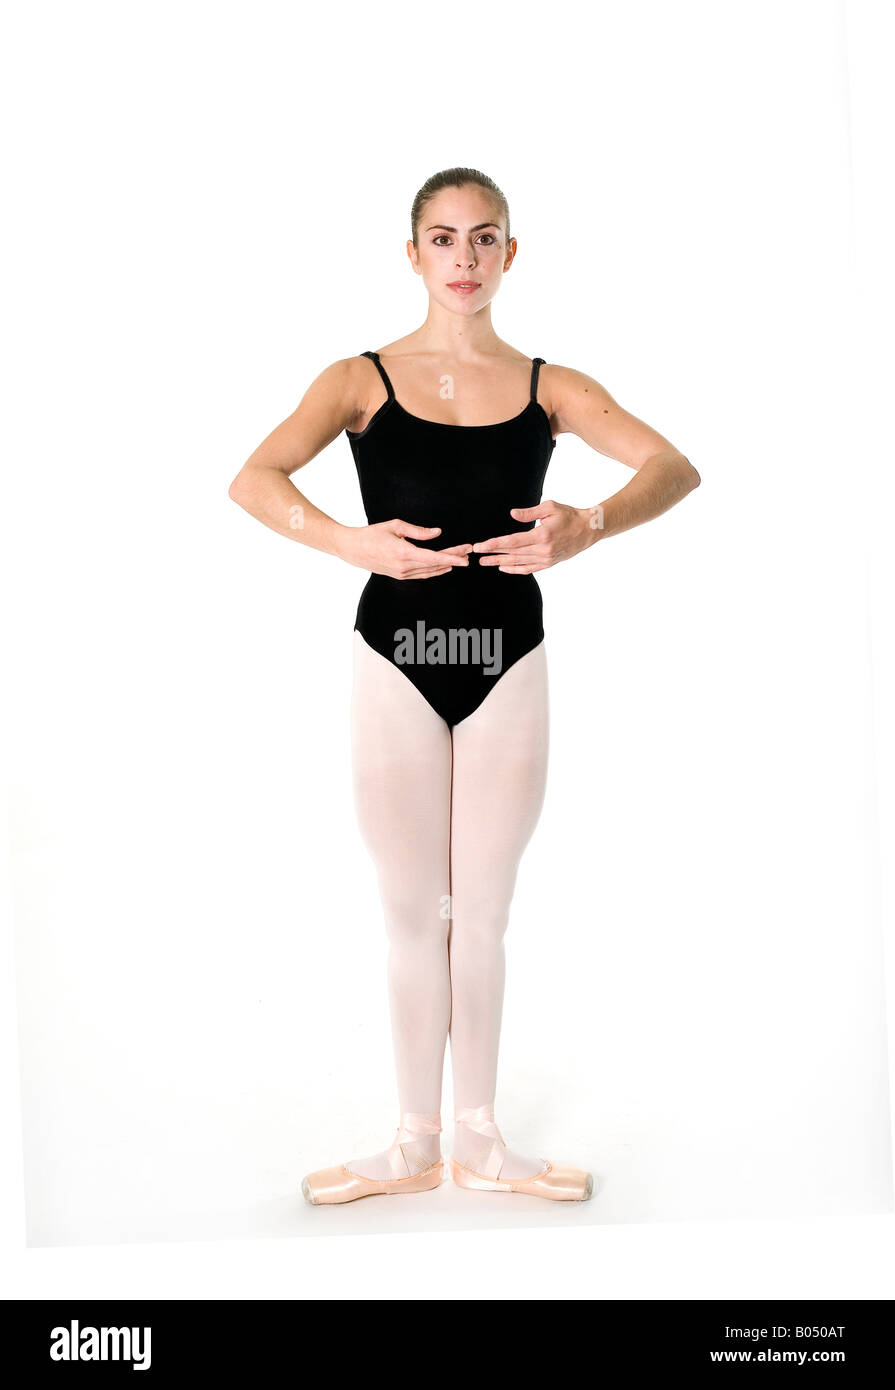 Young Ballerina in first position Photo - Alamy